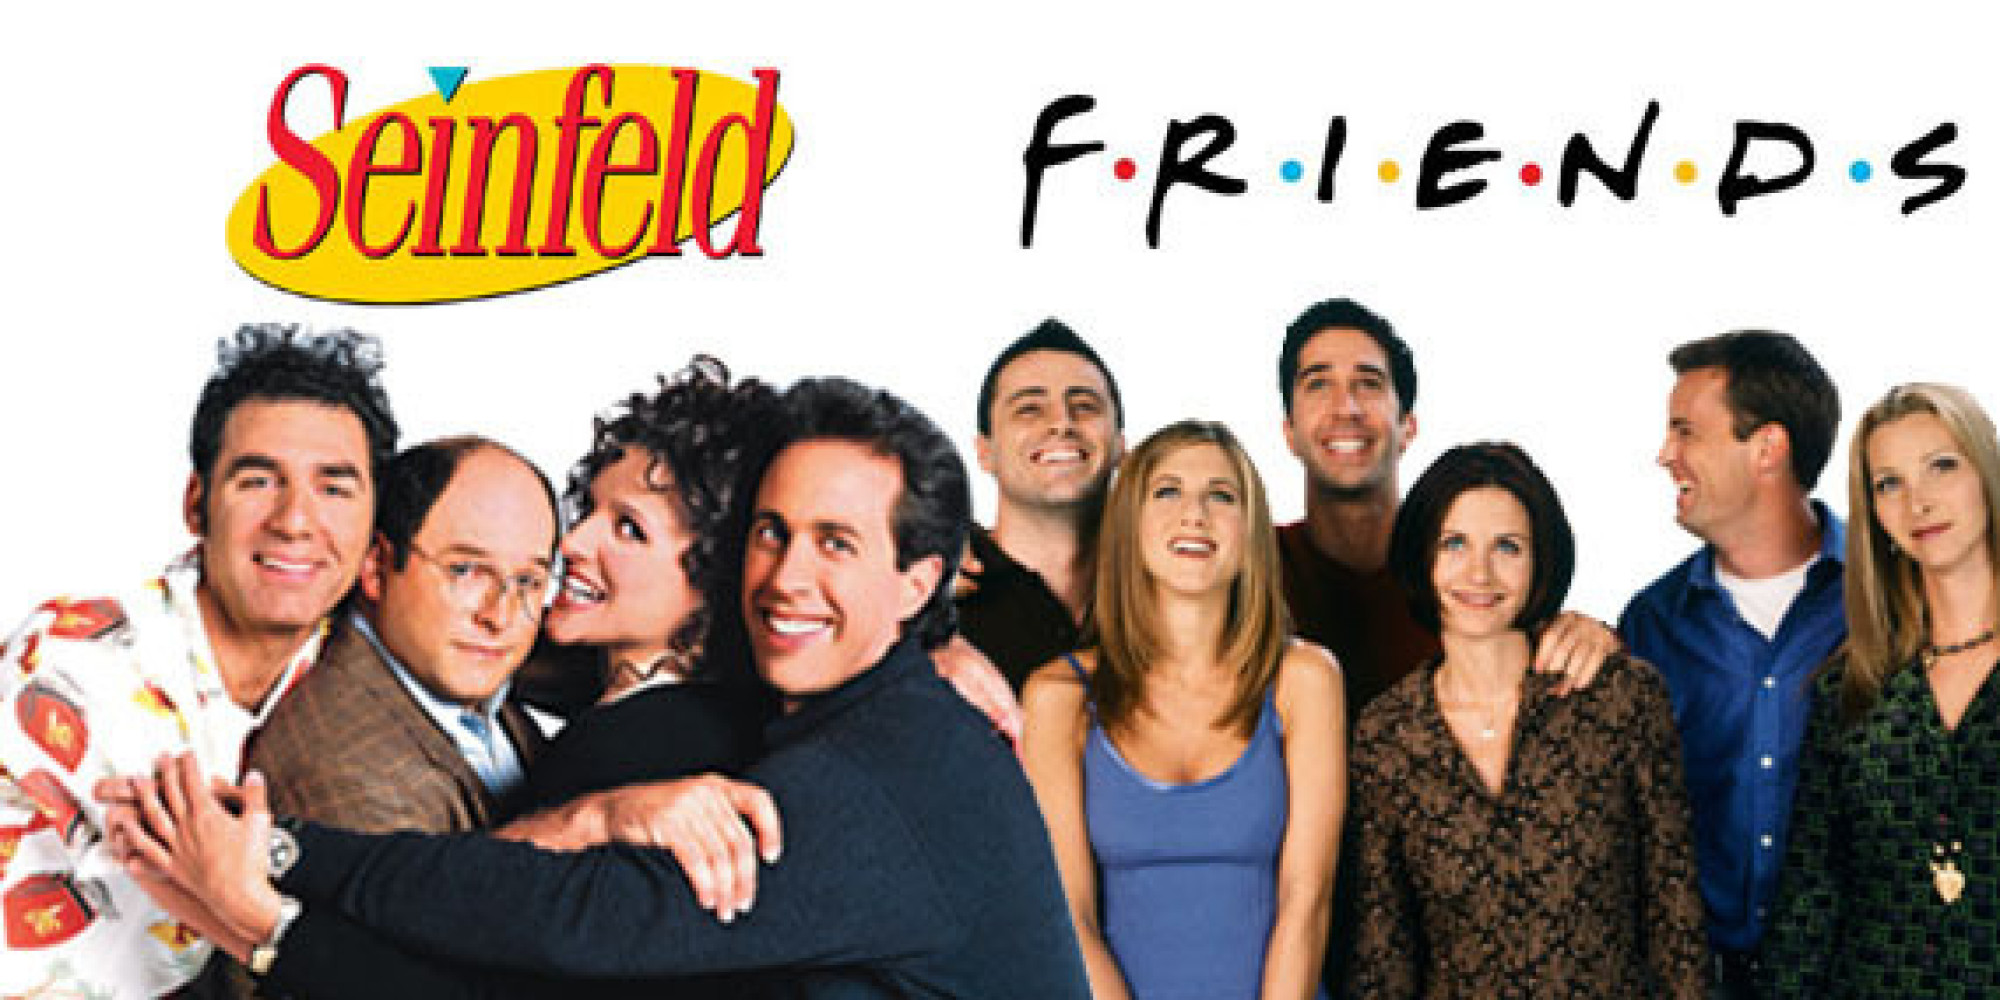 Seinfeld Television Series: Cultural Impact & Review